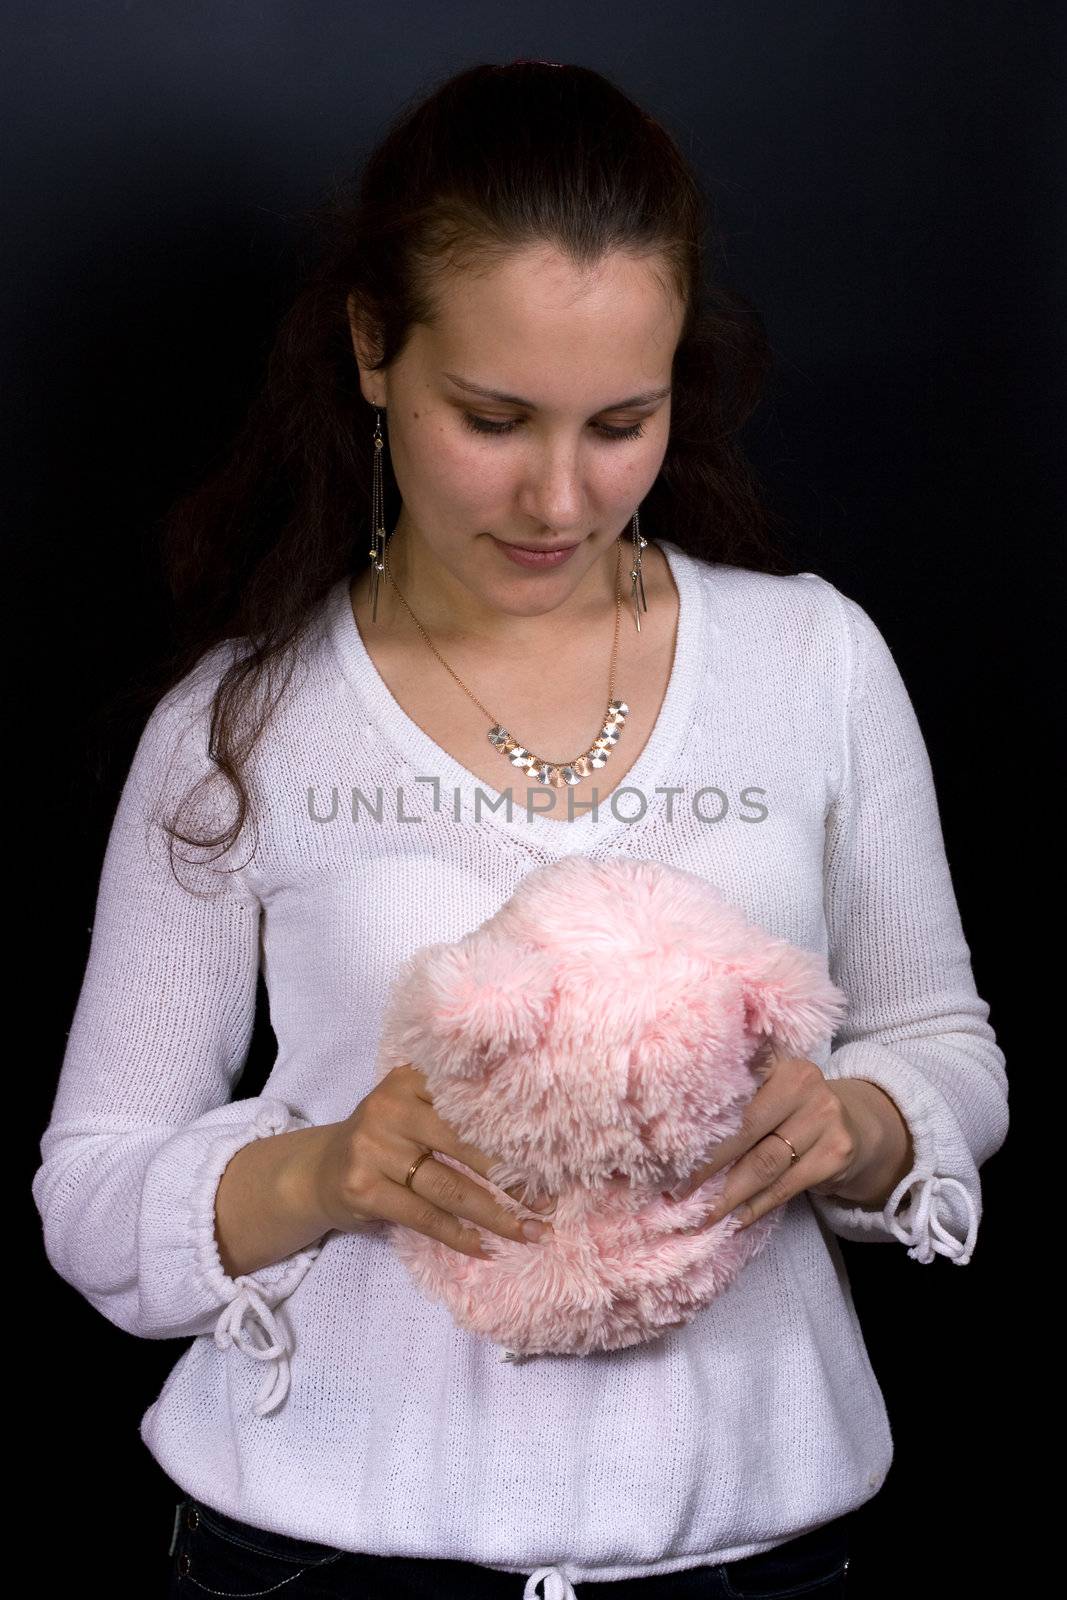 Female looking into plush toy in hands